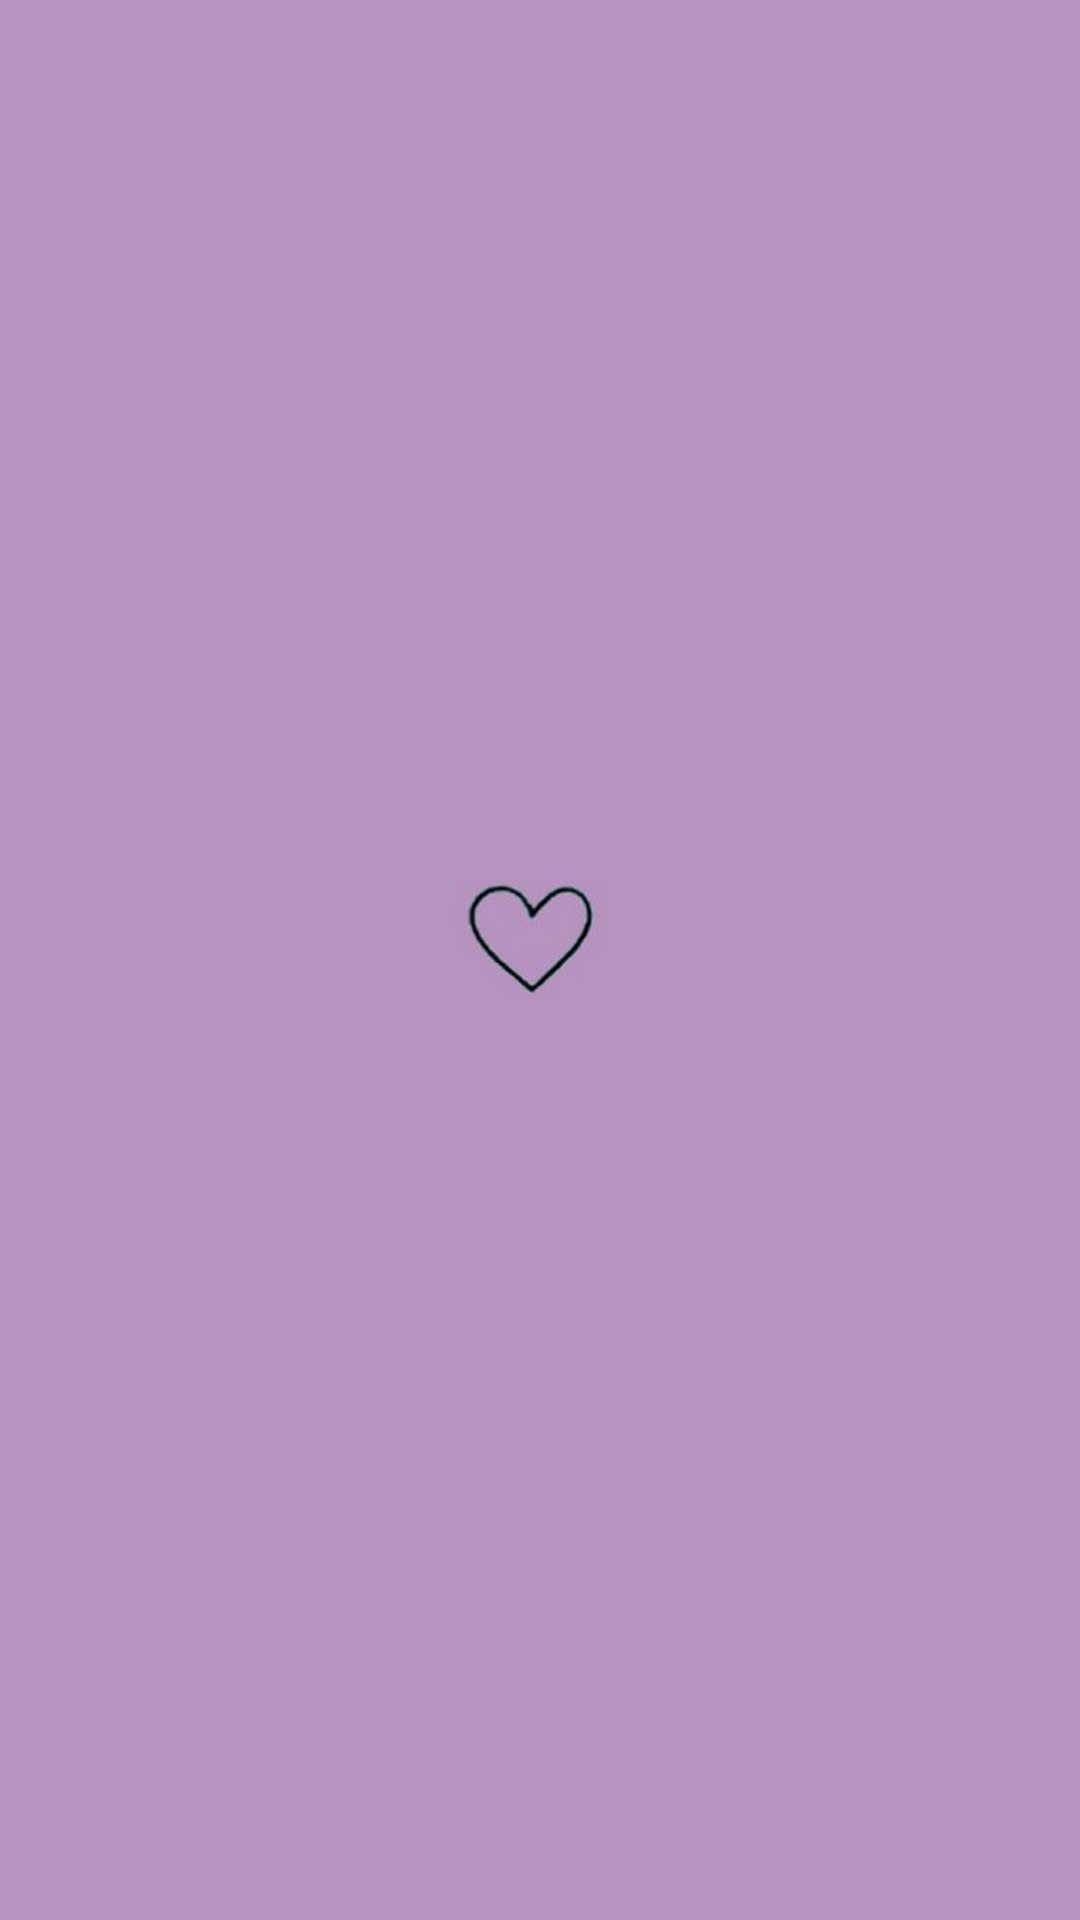 Cute Purple Aesthetic iPhone Wallpaper Design With high-resolution 1080X1920 pixel. You can set as wallpaper for Apple iPhone X, XS Max, XR, 8, 7, 6, SE, iPad. Enjoy and share your favorite HD wallpapers and background images